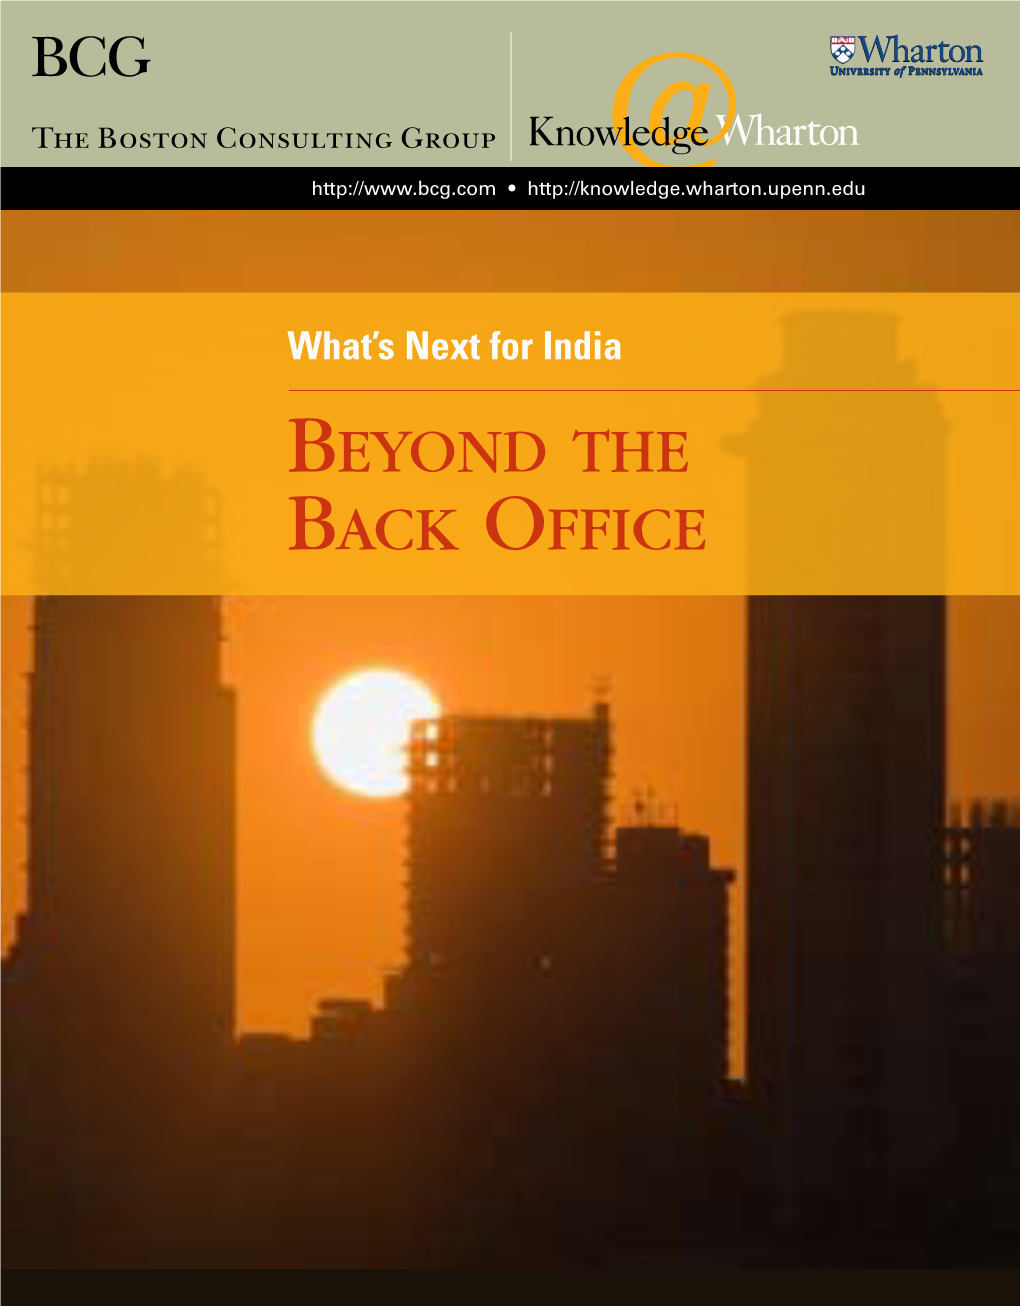 What's Next for India: Beyond the Back Office